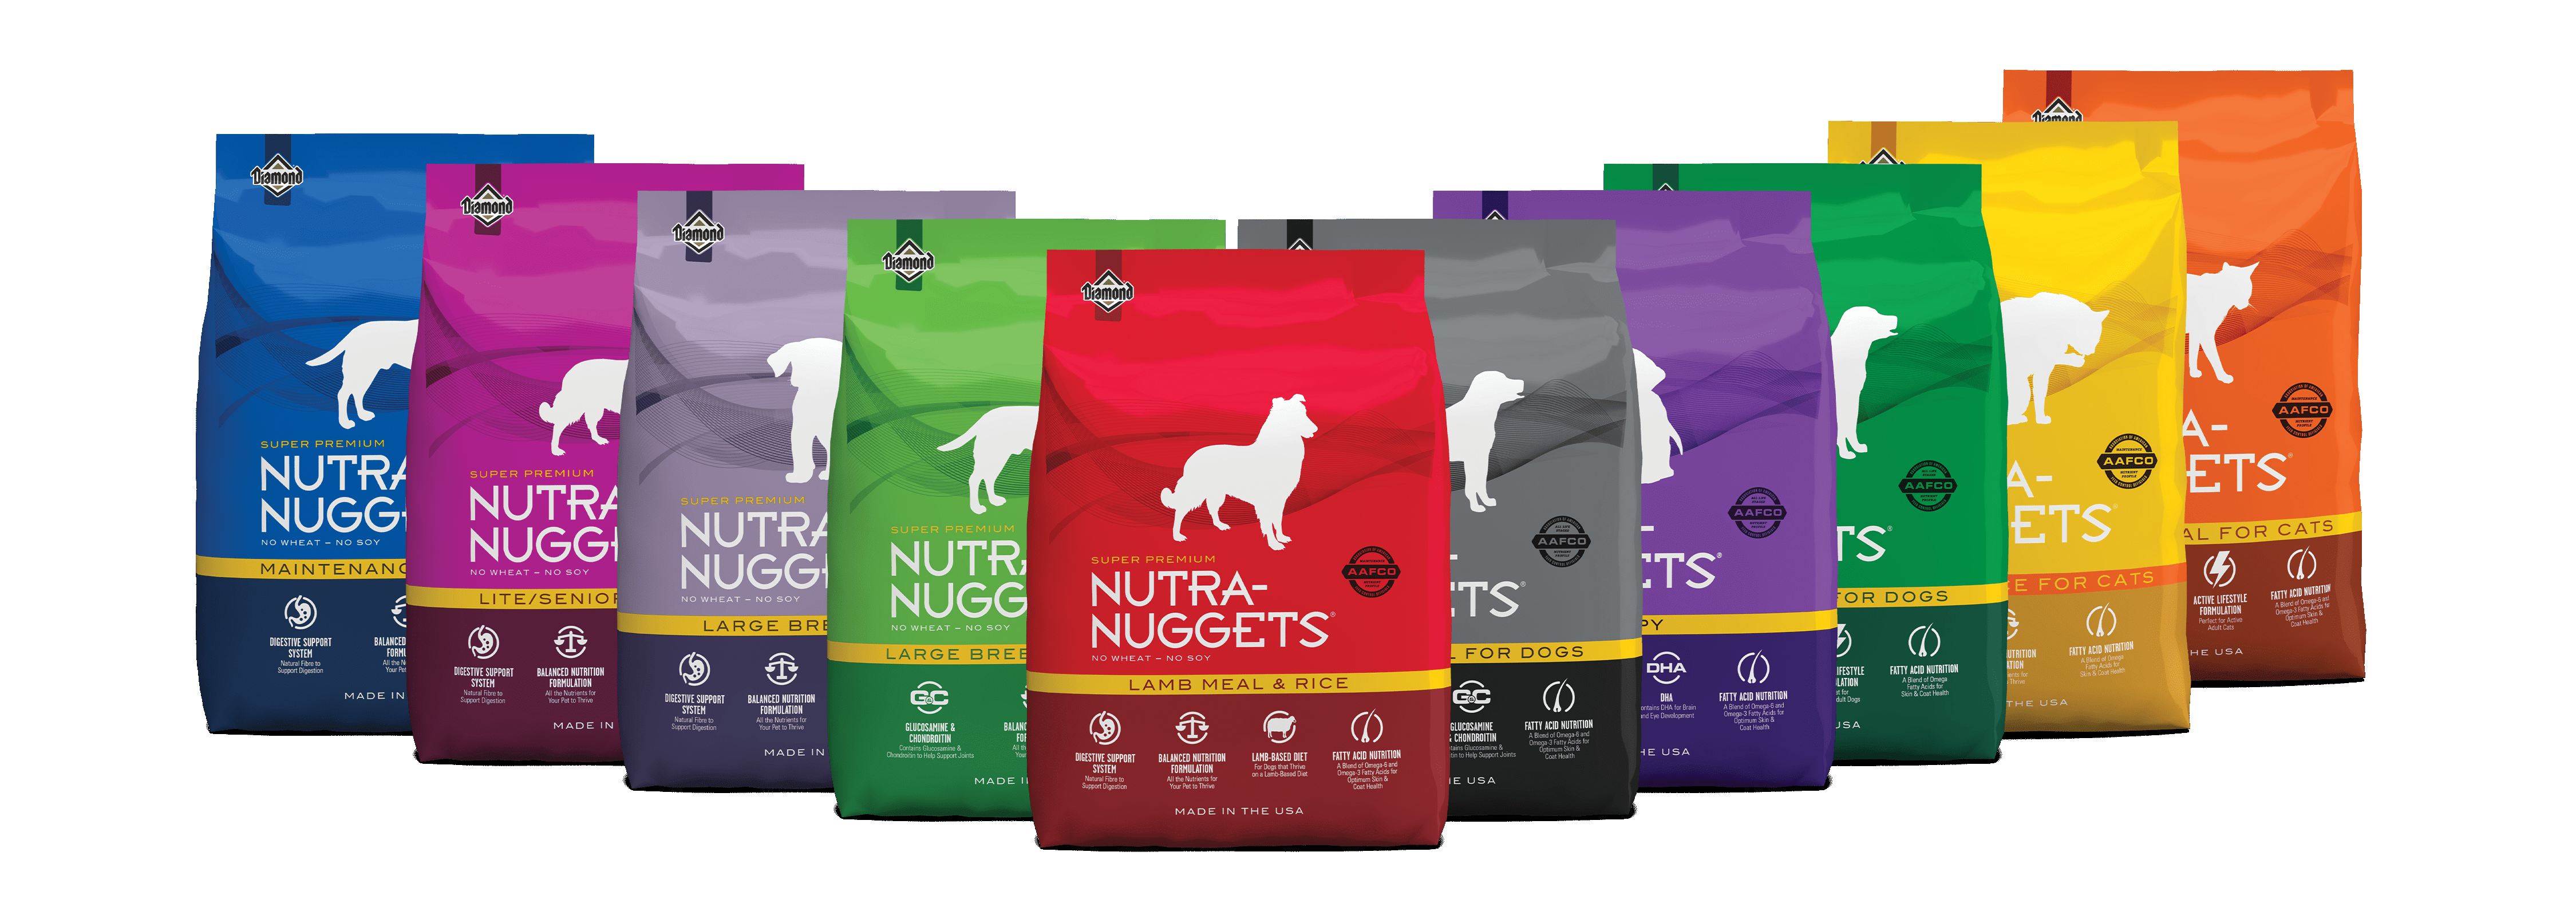 Nutra Nuggets Global Product Family | Nutra-Nuggets